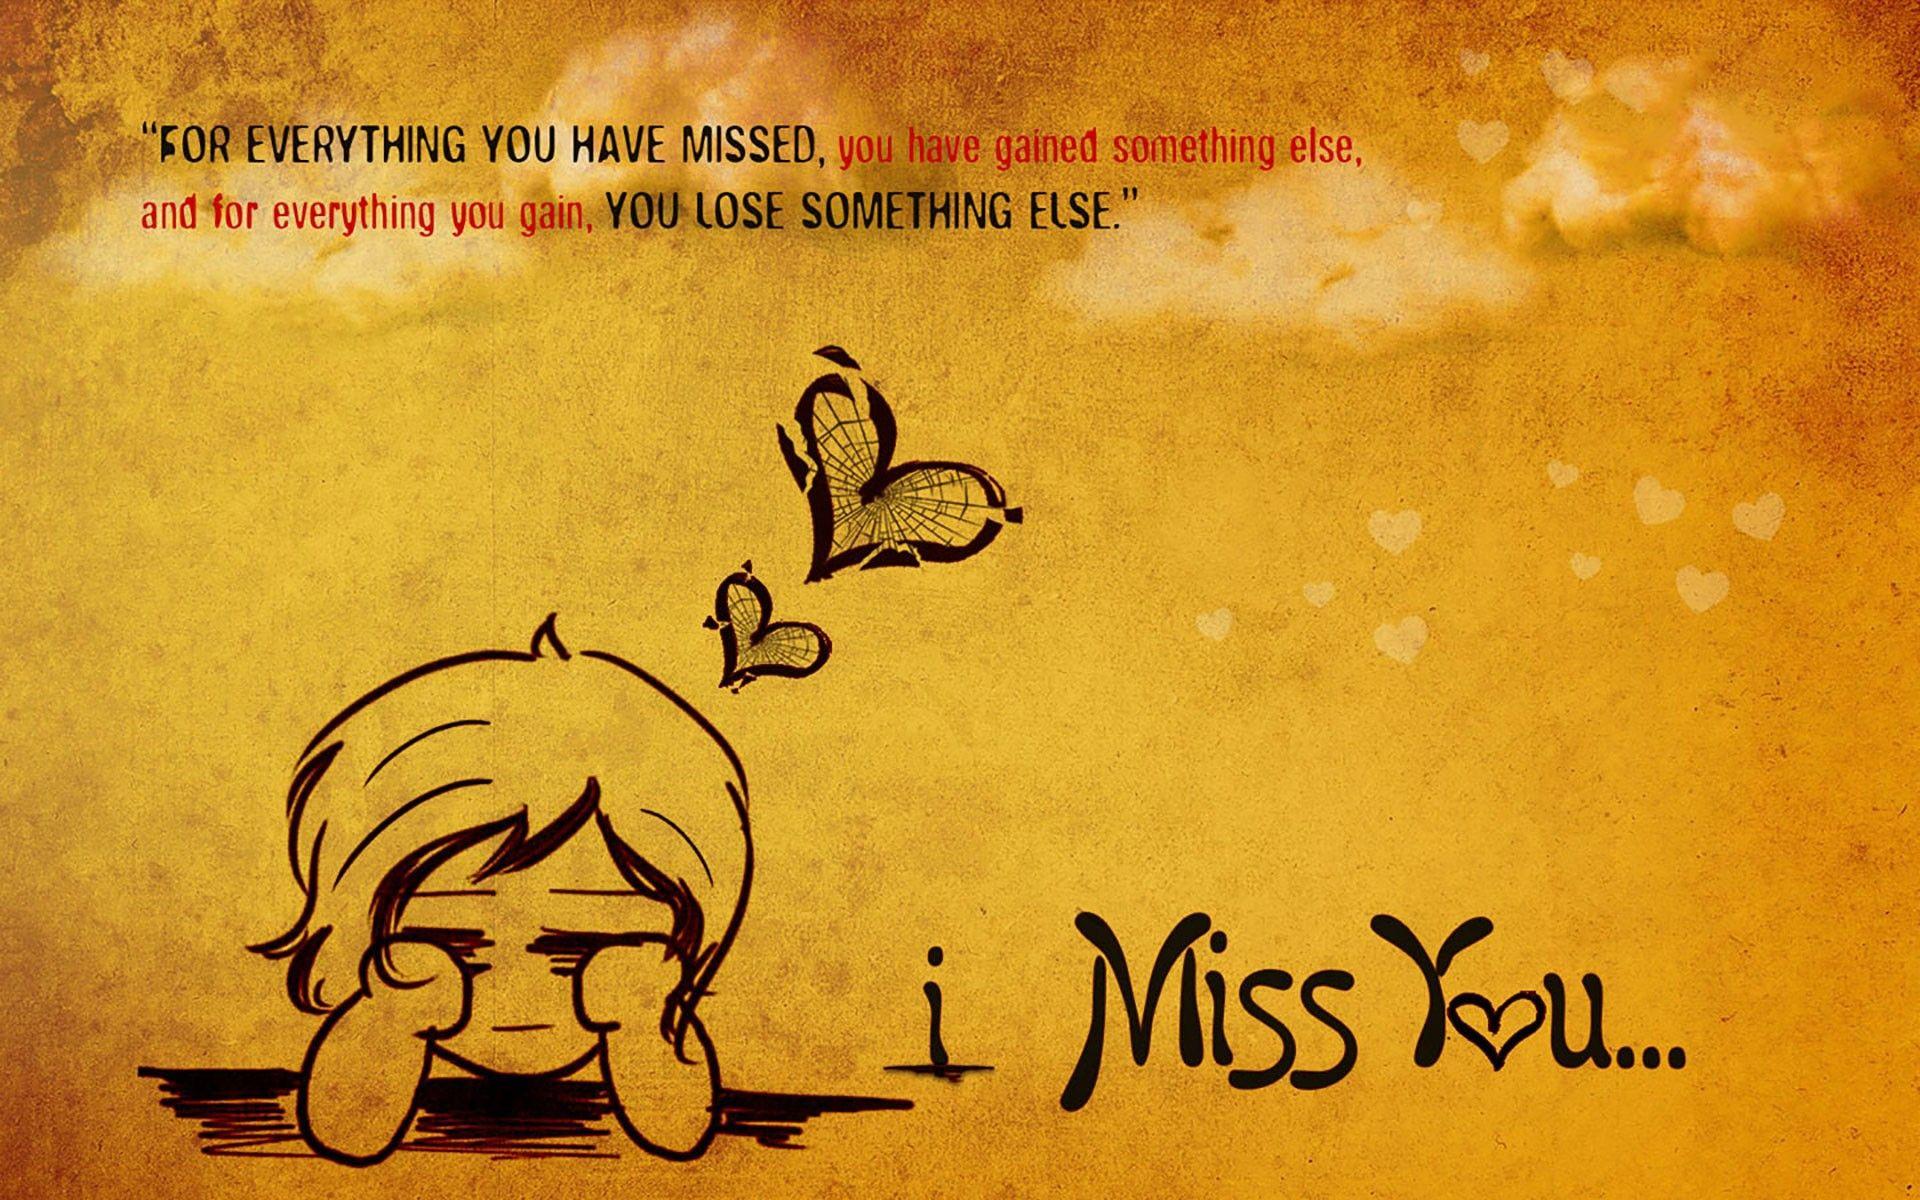 I Love You and I Miss You Wallpaper